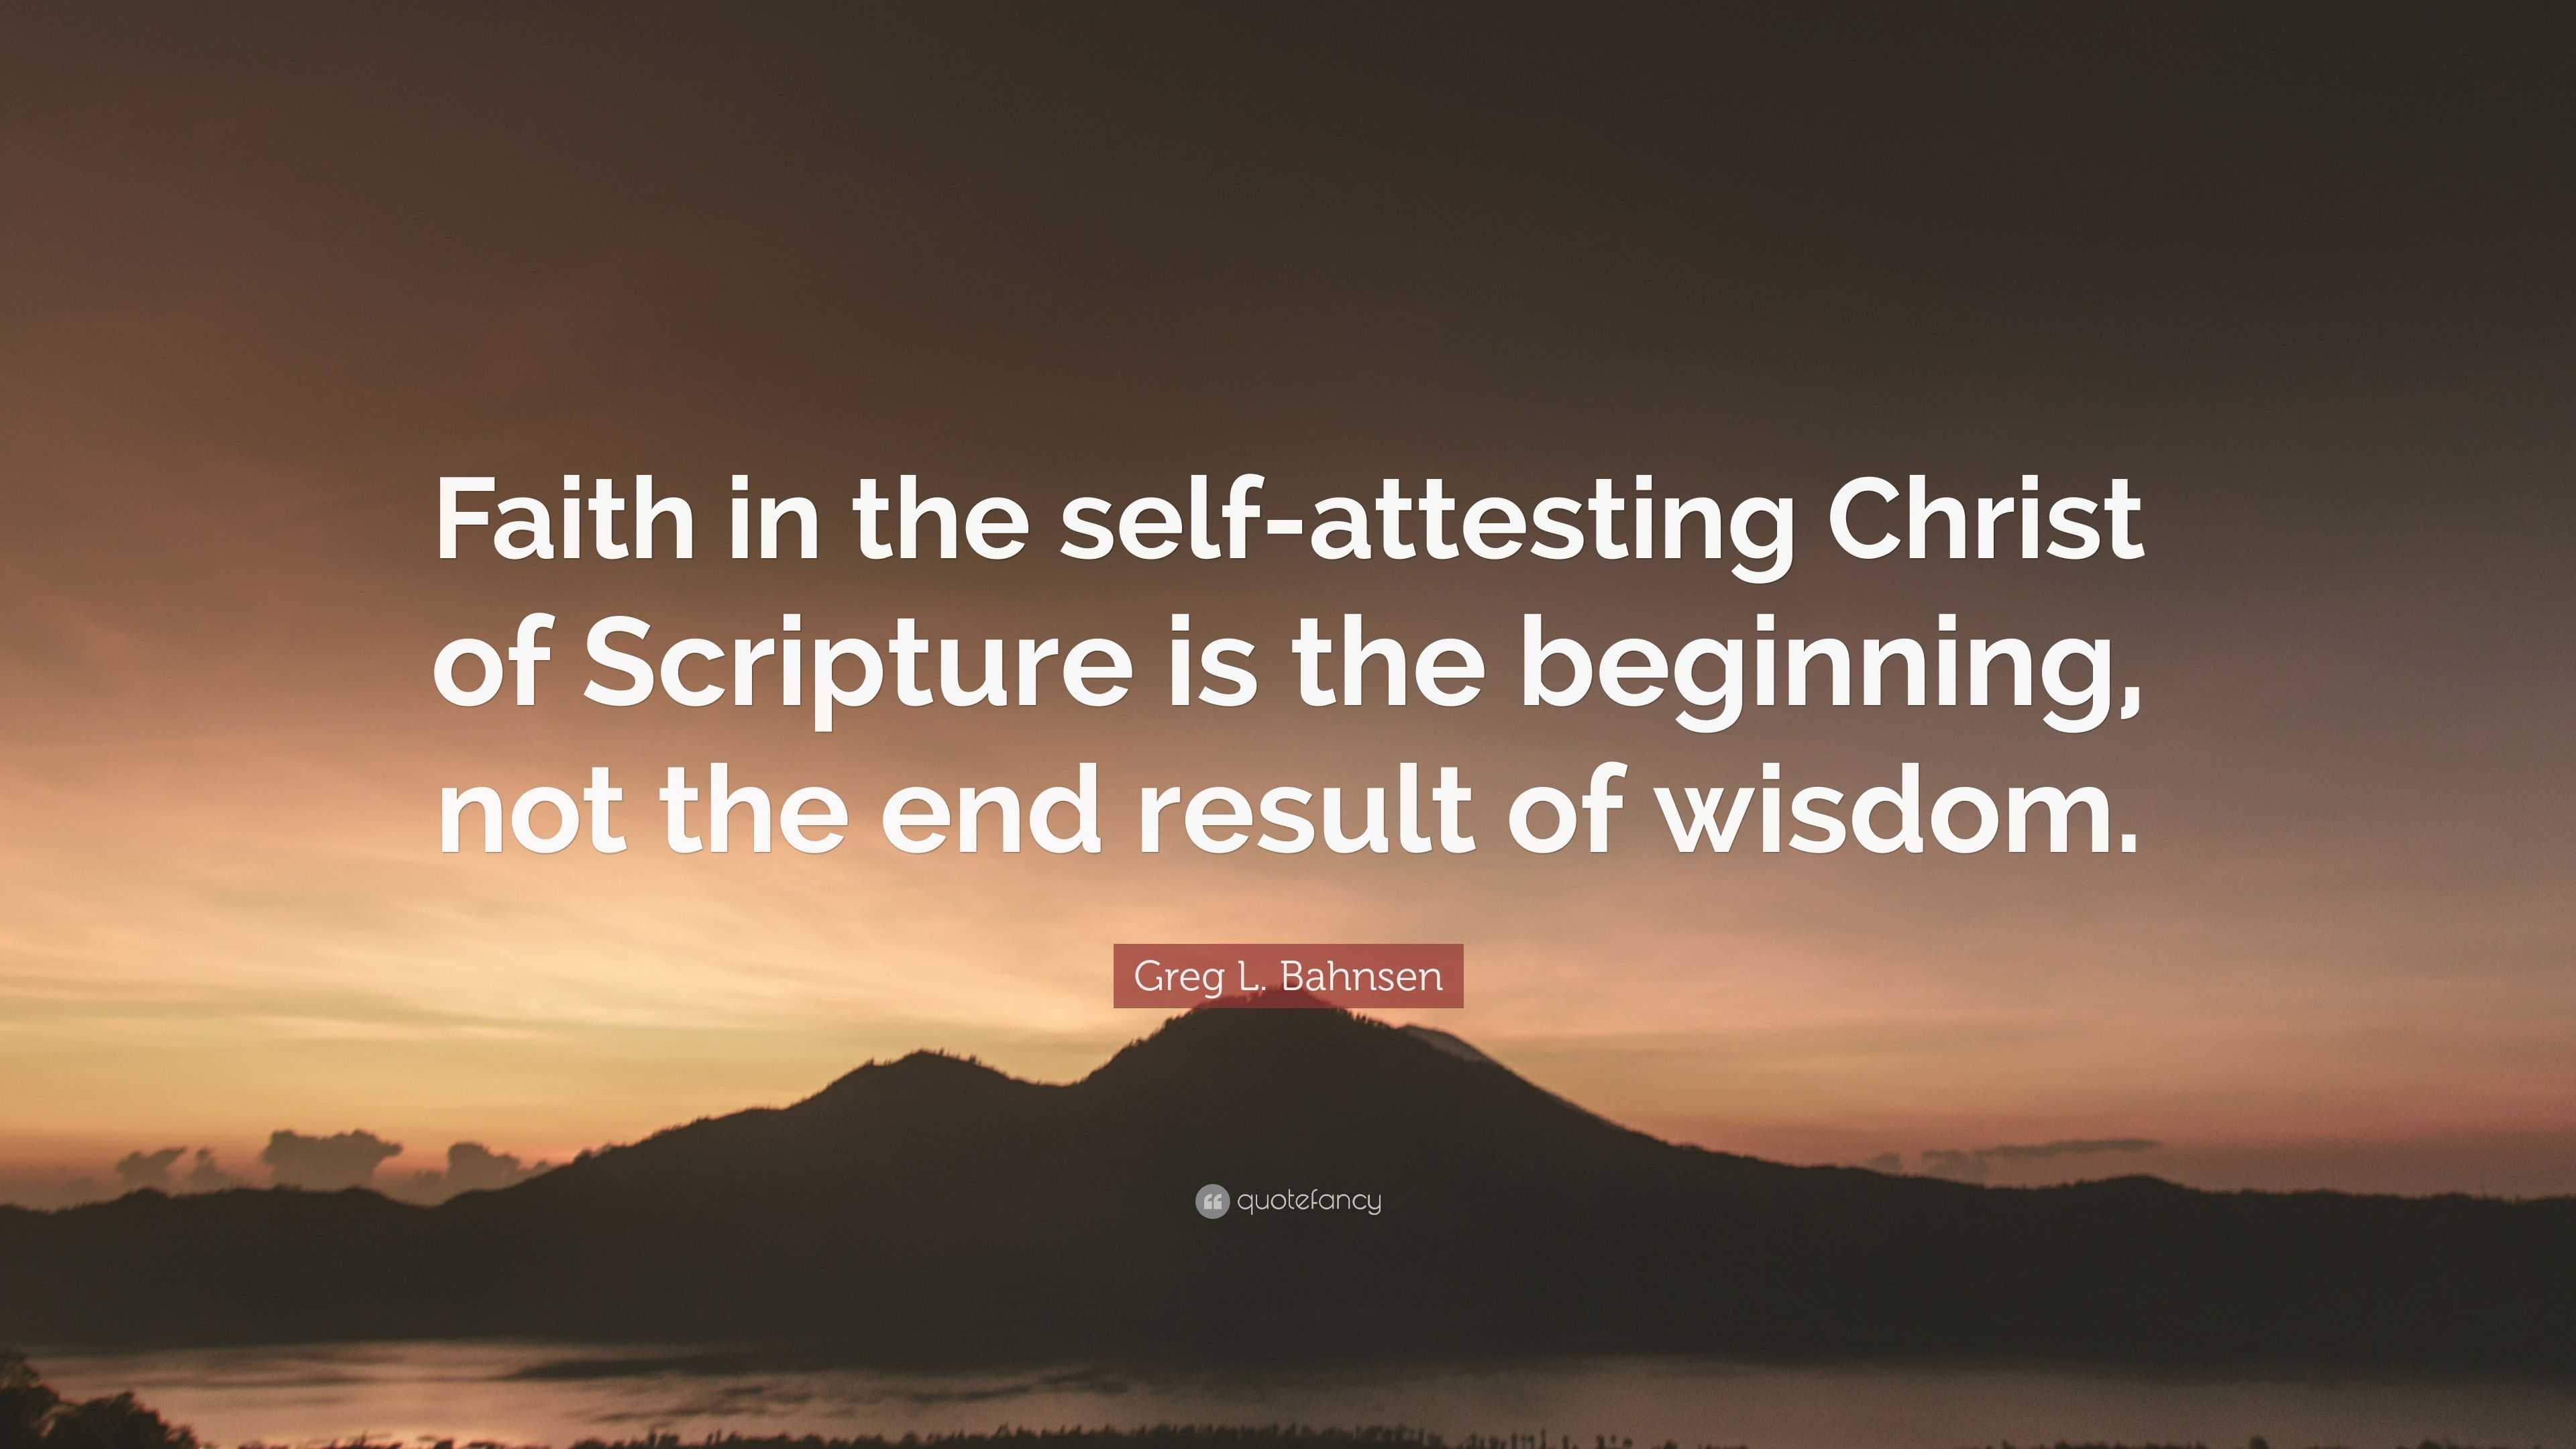 Greg L. Bahnsen Quote: “Faith in the self-attesting Christ of Scripture ...